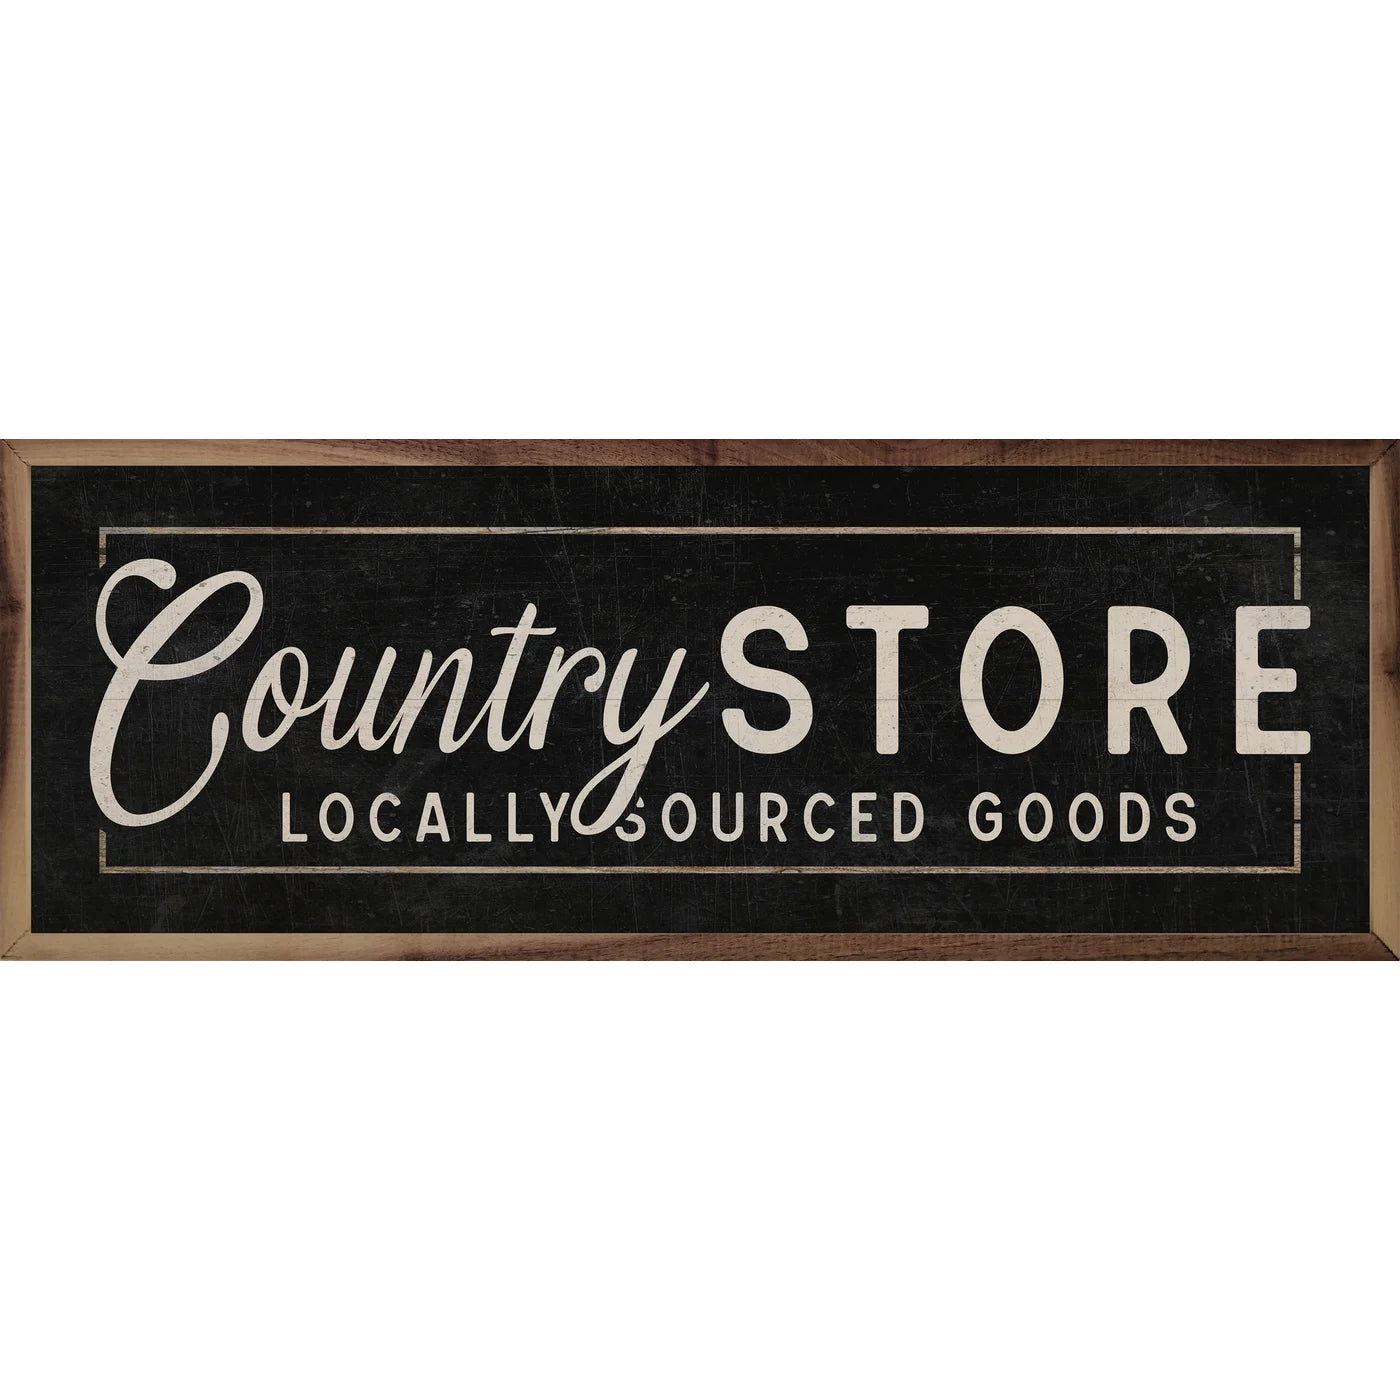 Country Store Locally Sourced Goods Border Wood Framed Print